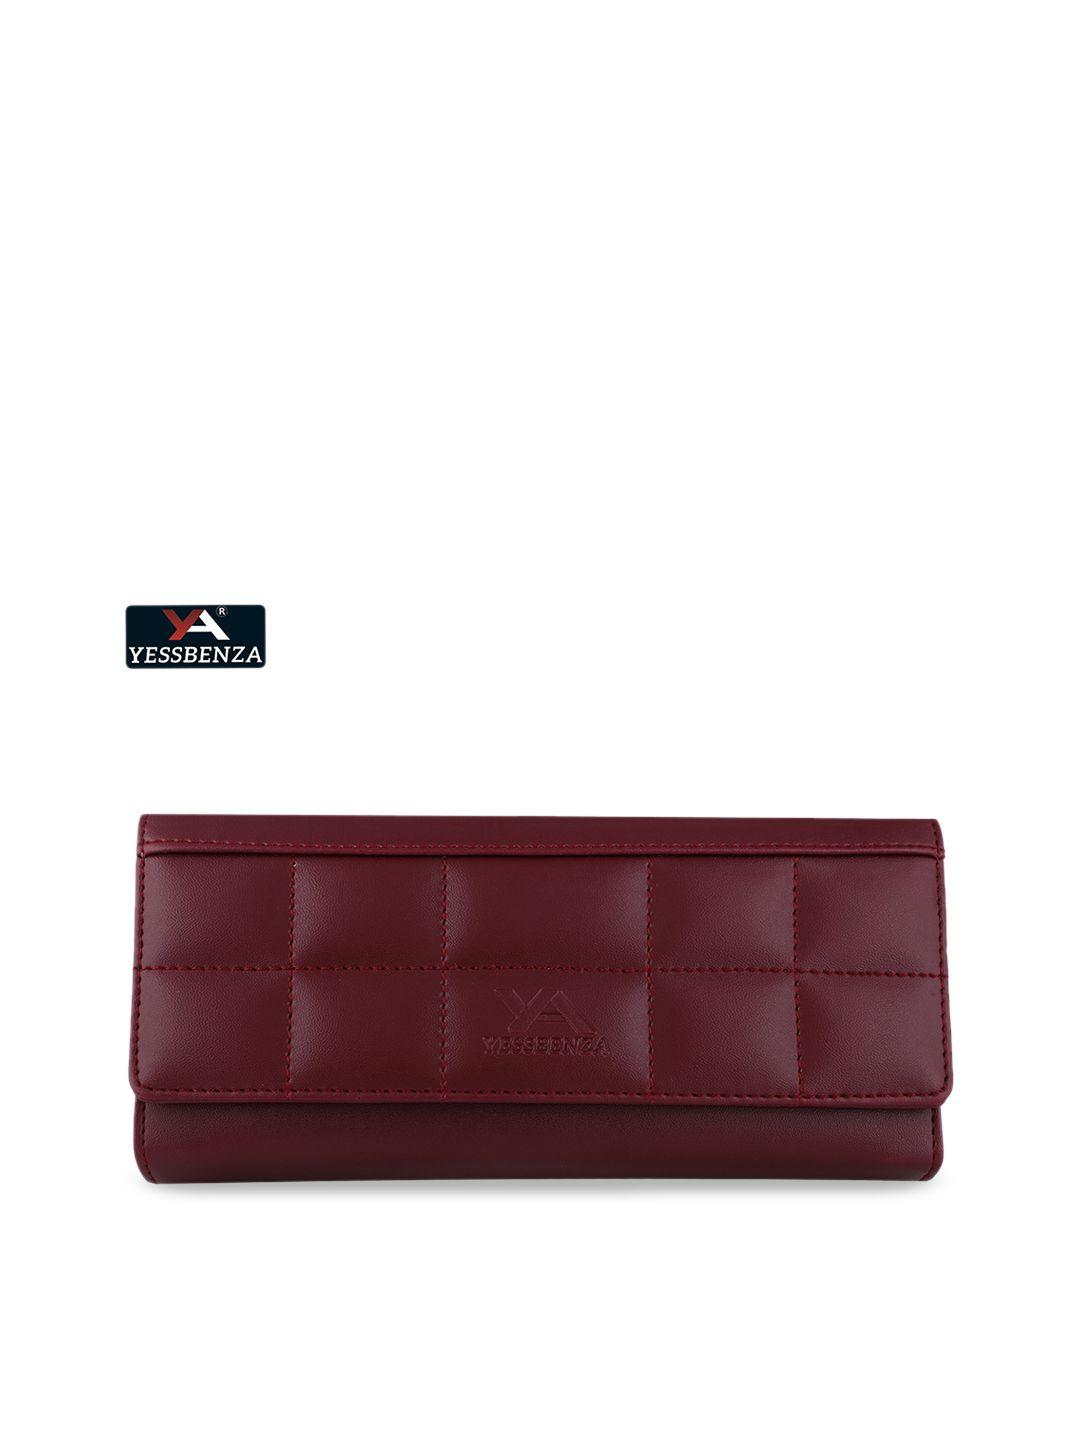 yessbenza women maroon quilted two fold wallet